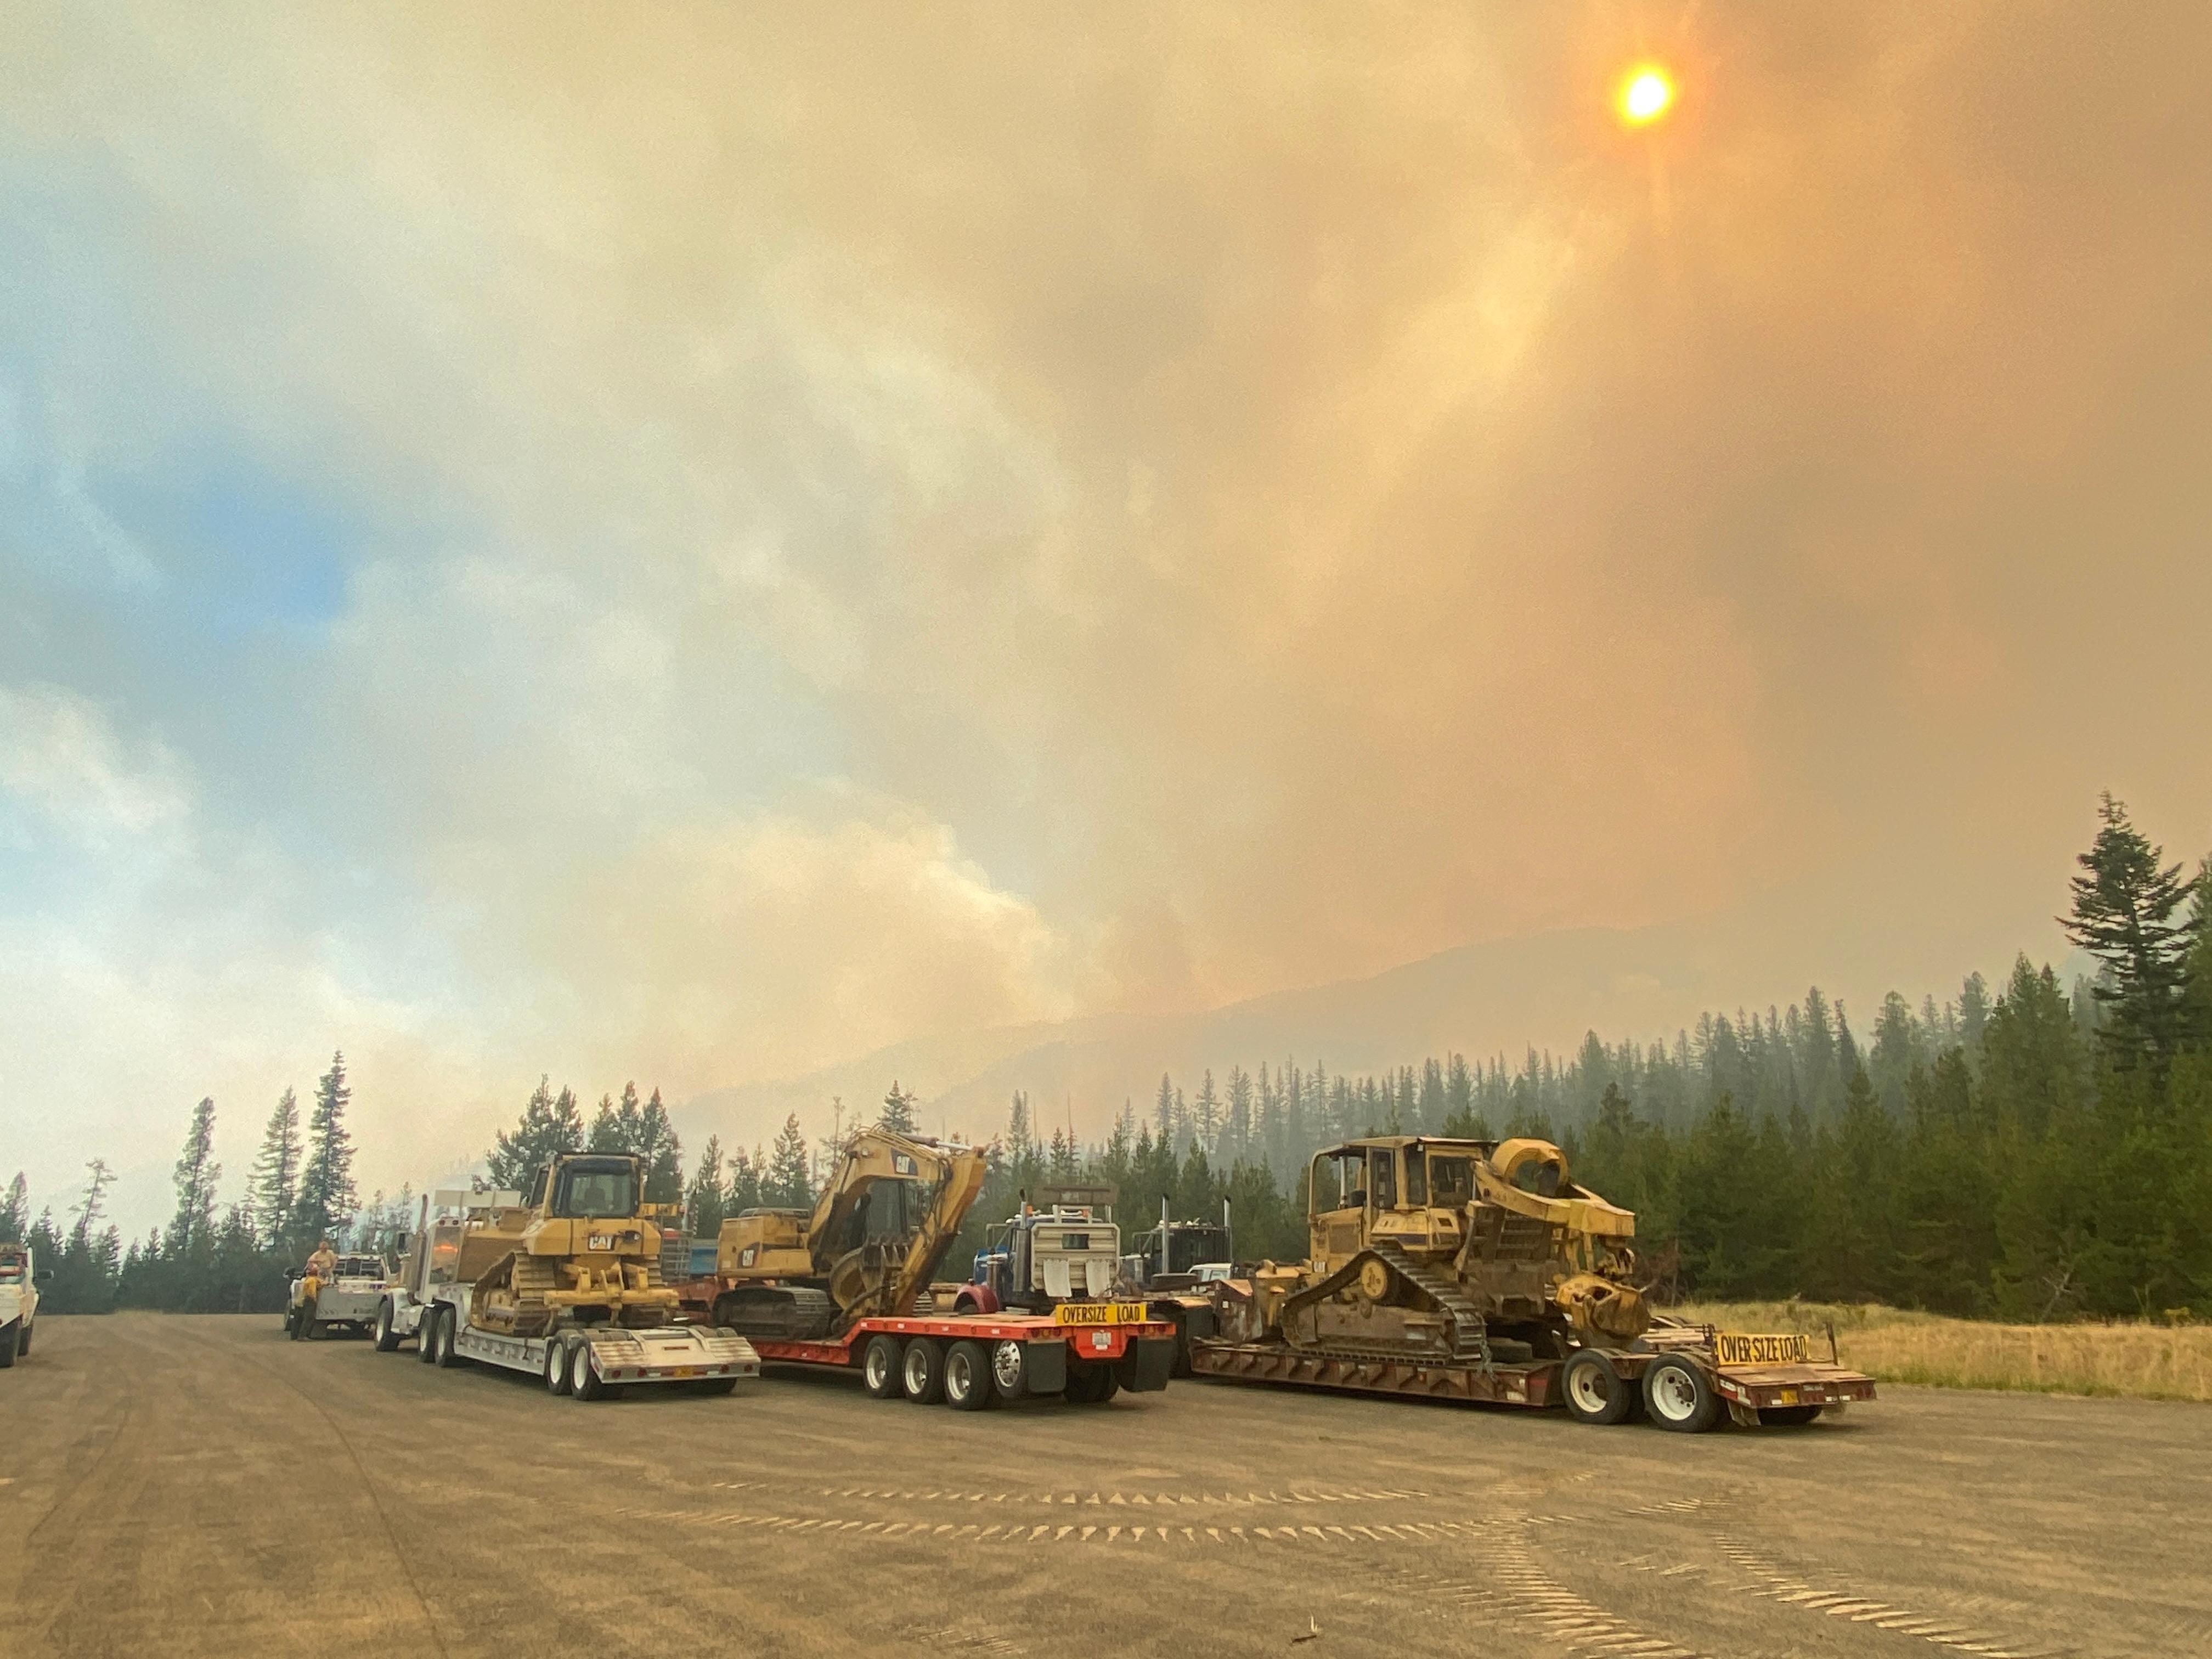 Nebo Fire staging area 9/6/22